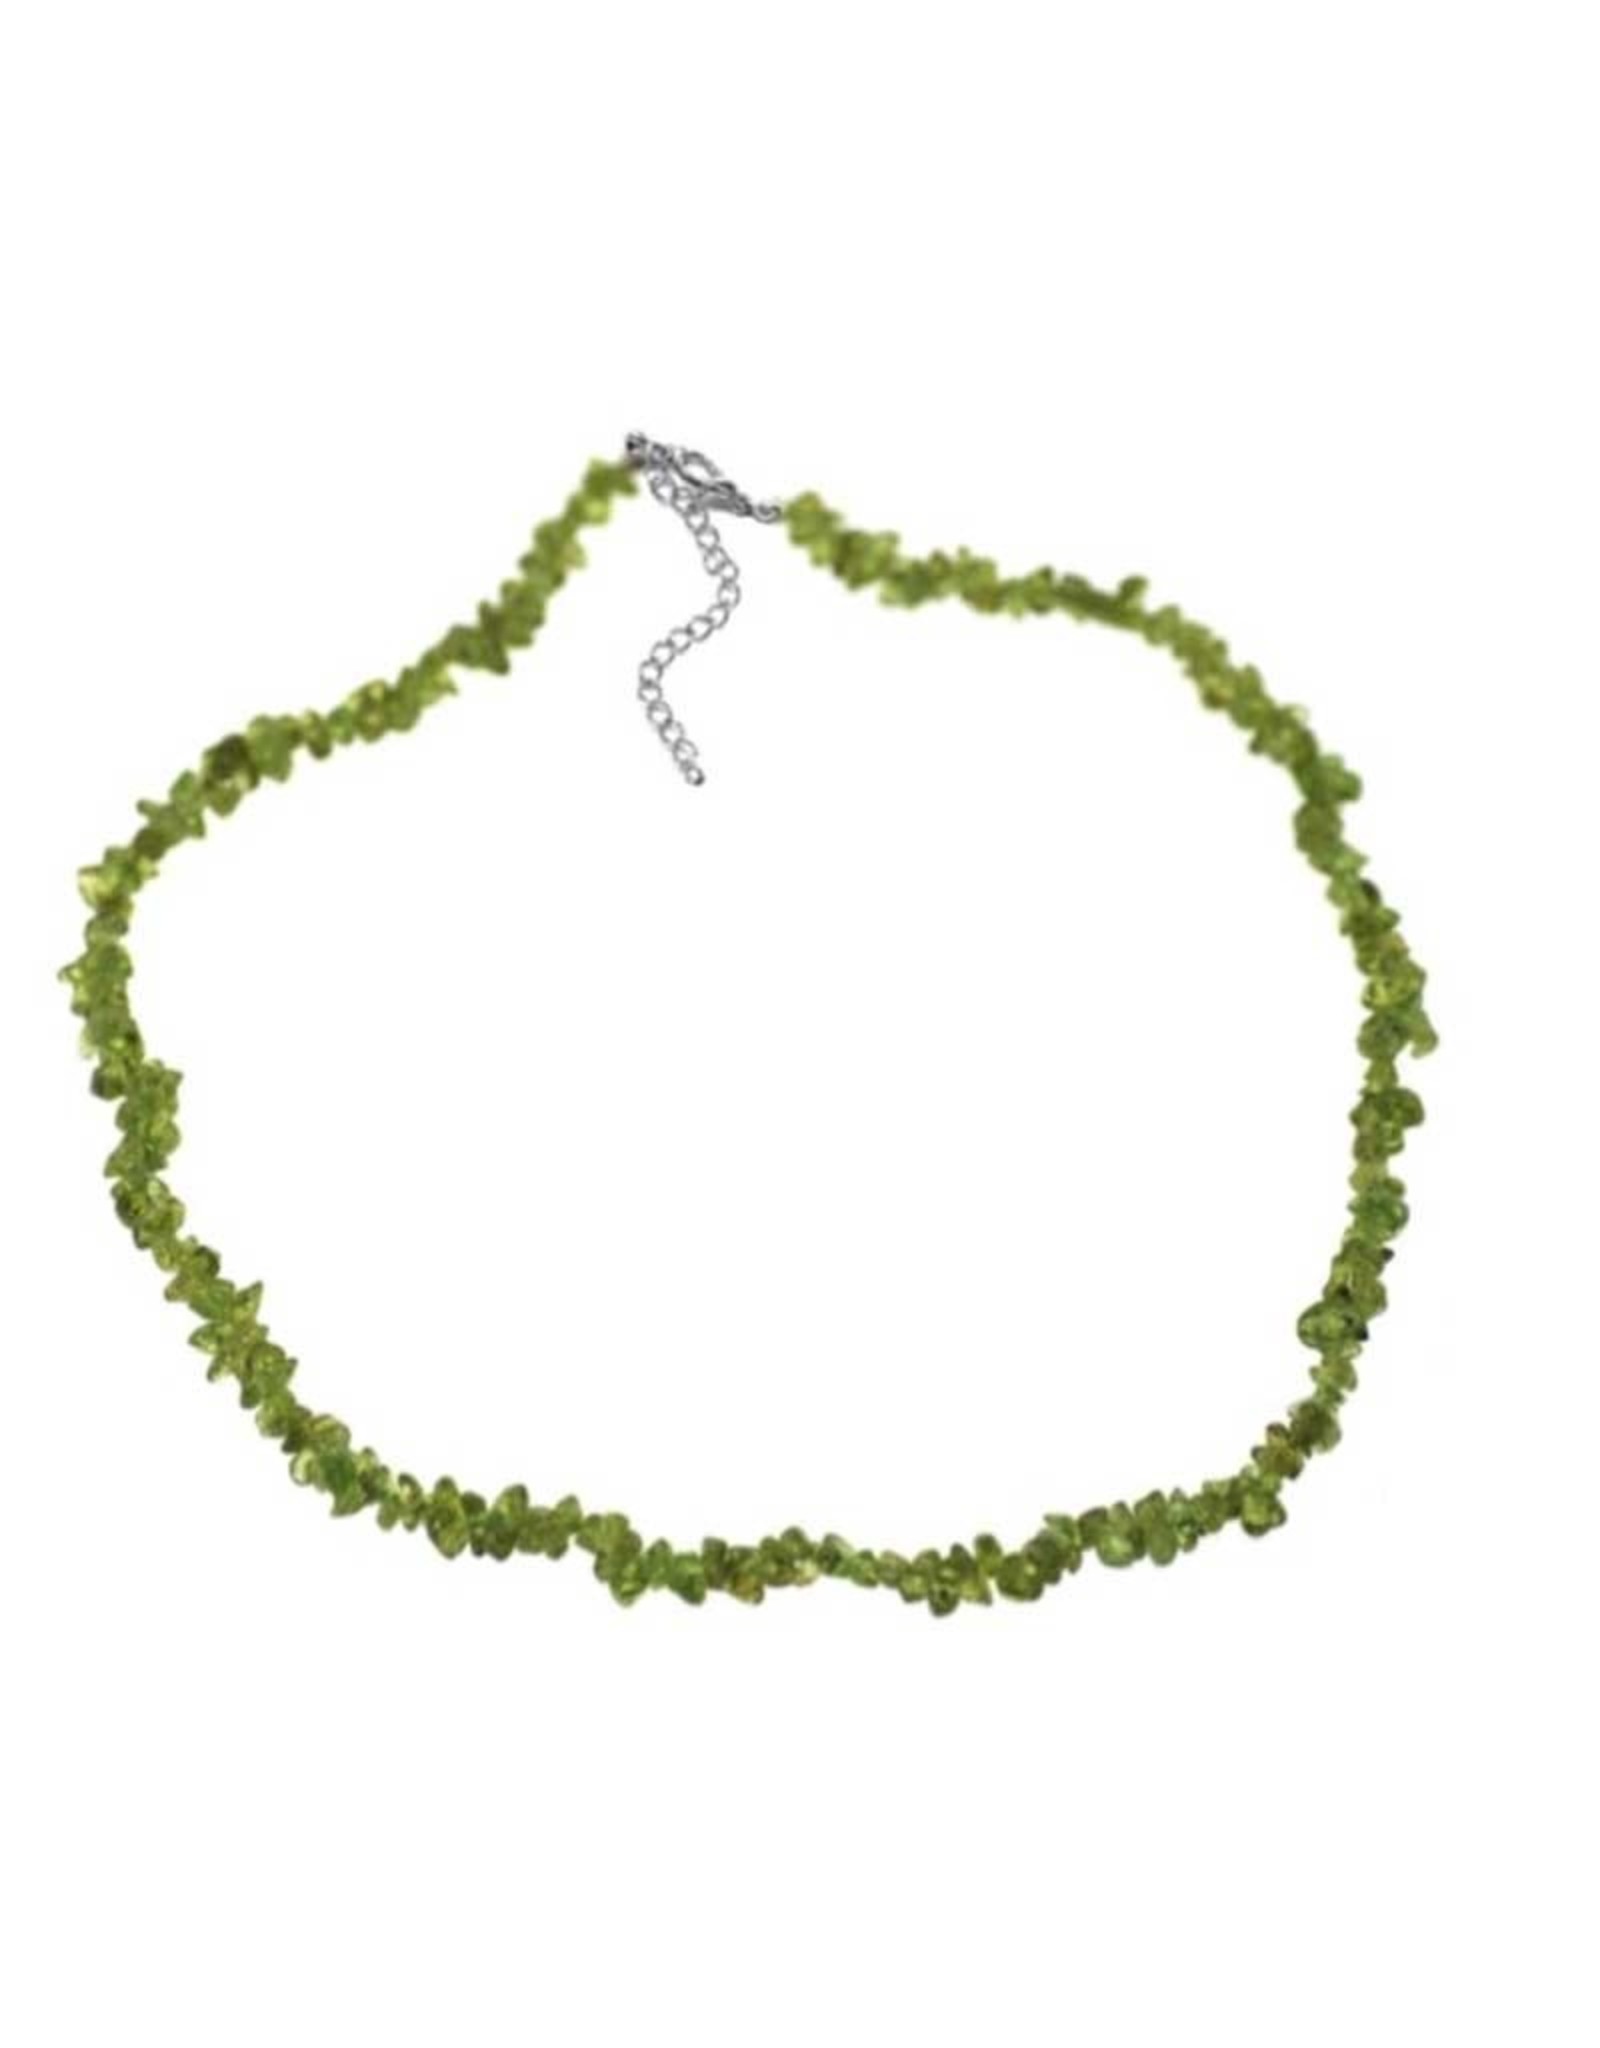 Peridot 18" Chip Necklace w Clasp